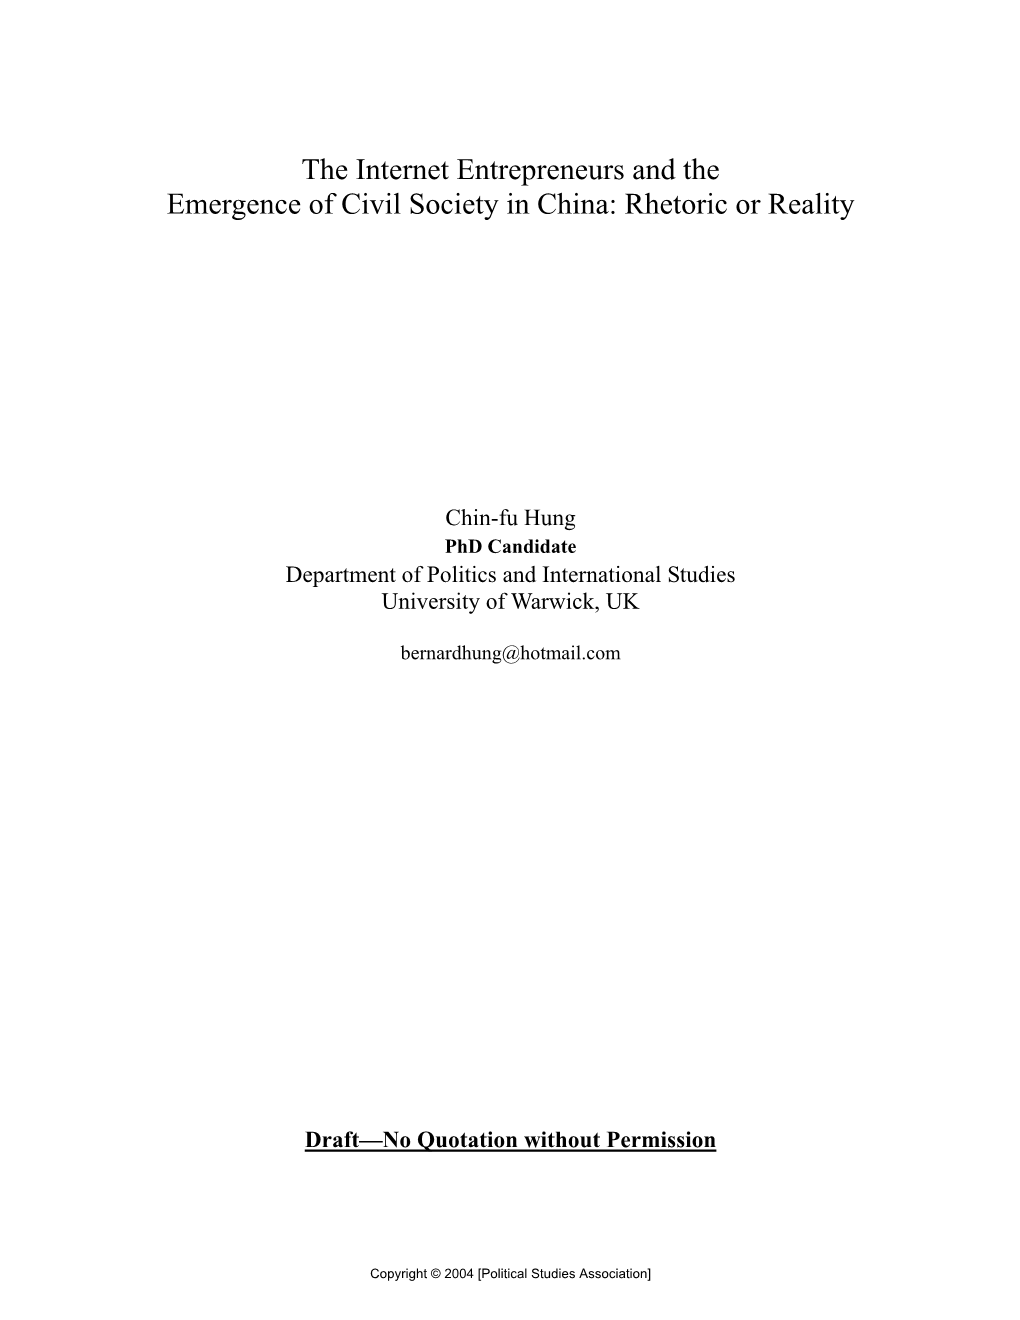 The Internet Entrepreneurs and the Emergence of Civil Society in China: Rhetoric Or Reality